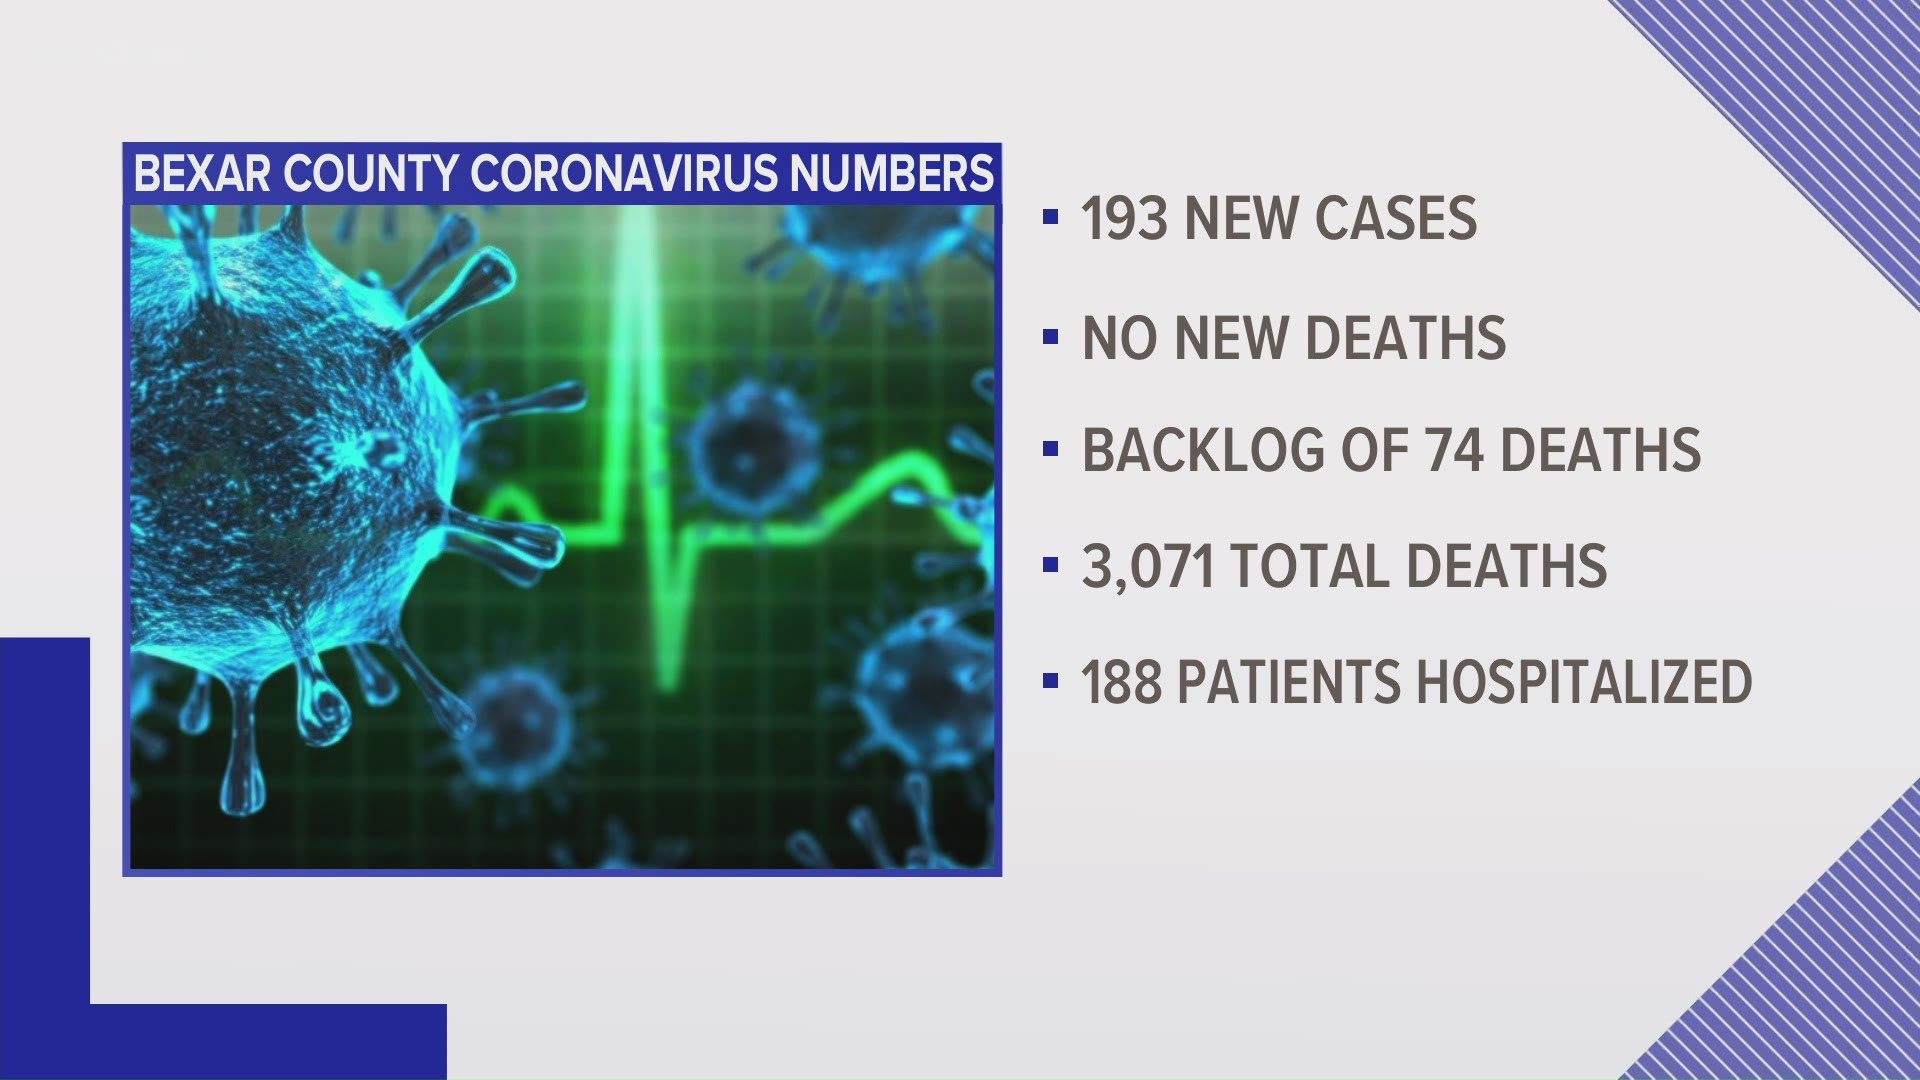 Meanwhile, more than 202,500 residents have been diagnosed with the coronavirus in the ongoing pandemic.